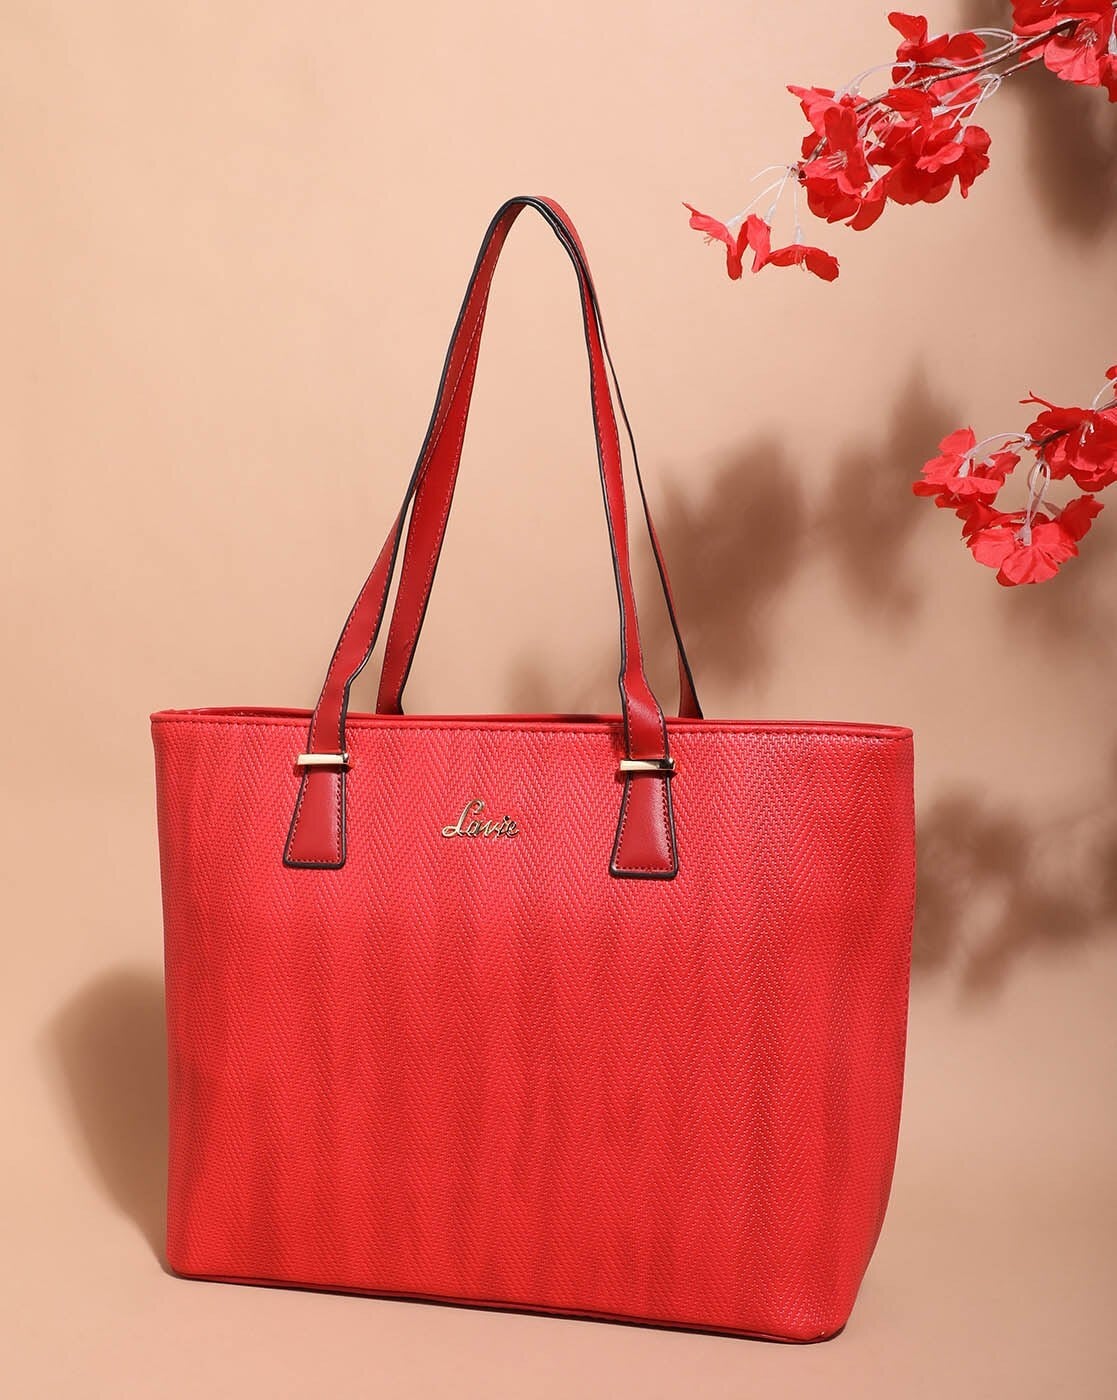 Buy Louis Vuitton LV Escale Onthego GM Red Tote Bags Limited Edition Purse  Handbags at Amazon.in